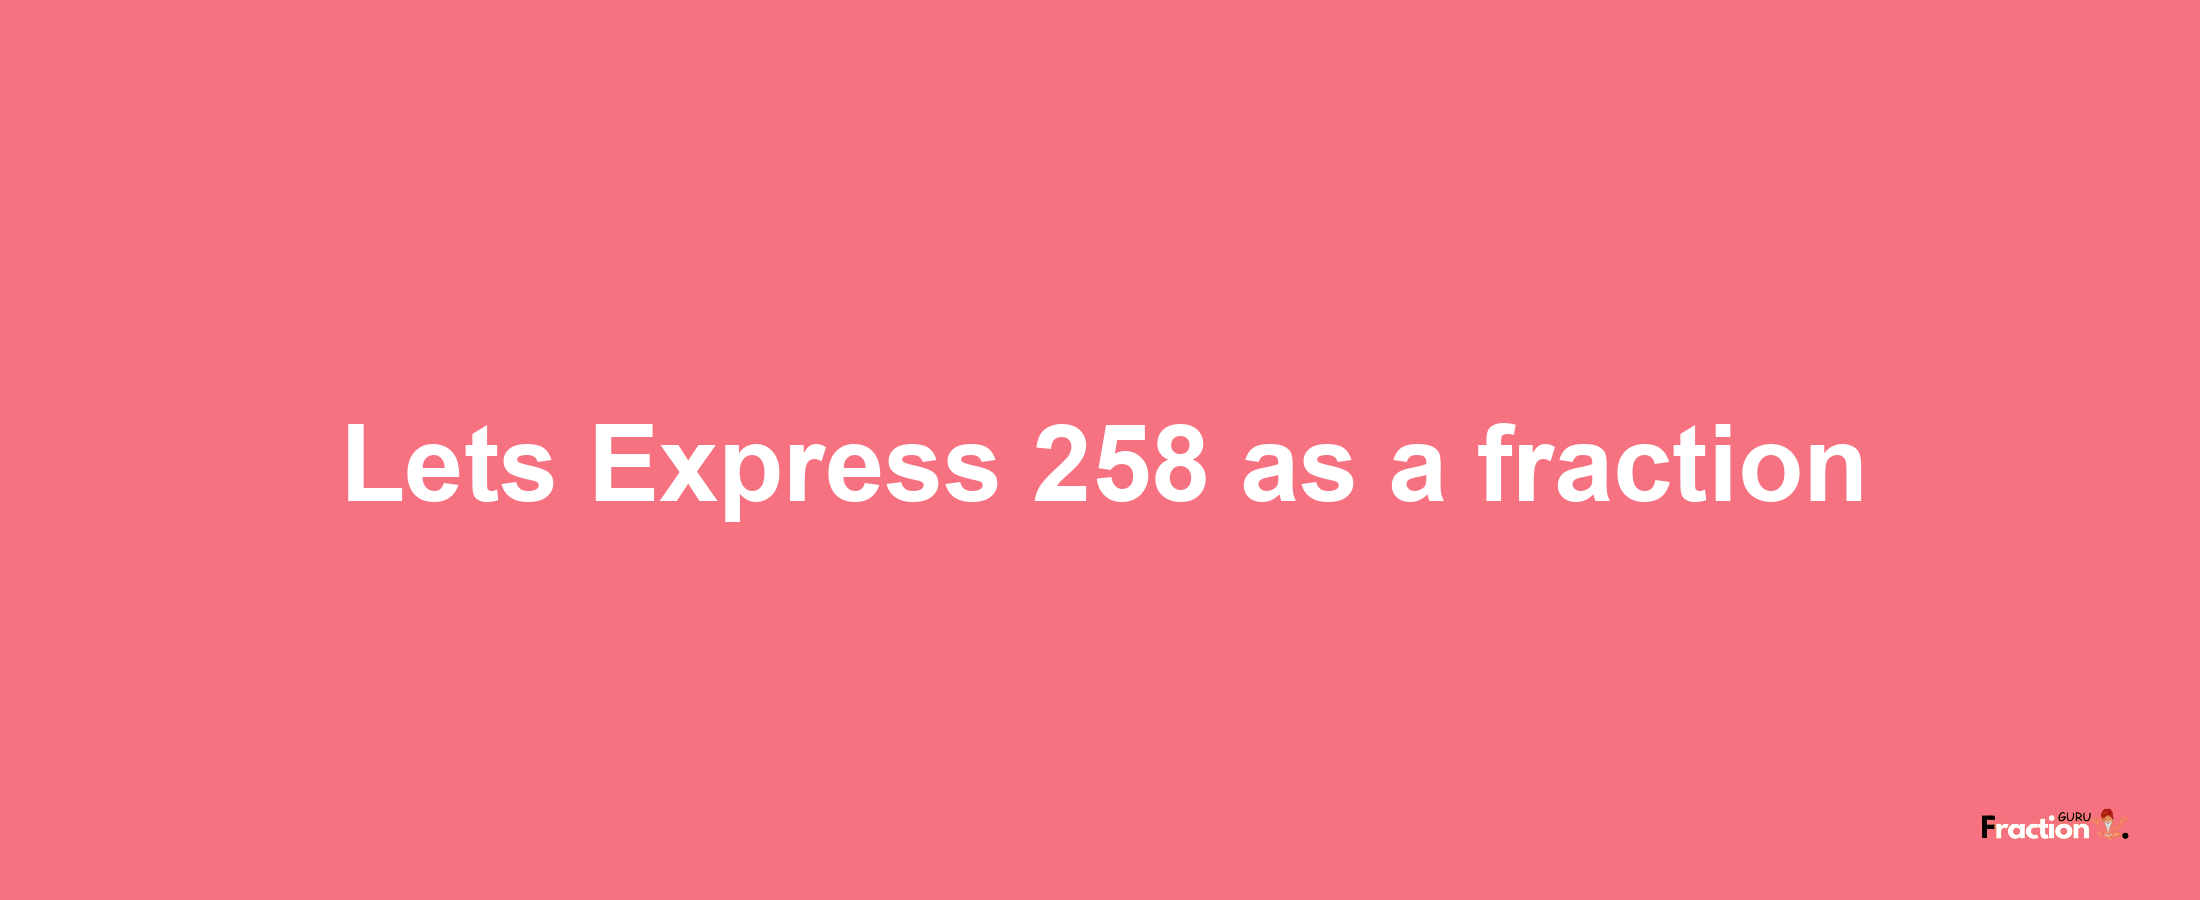 Lets Express 258 as afraction